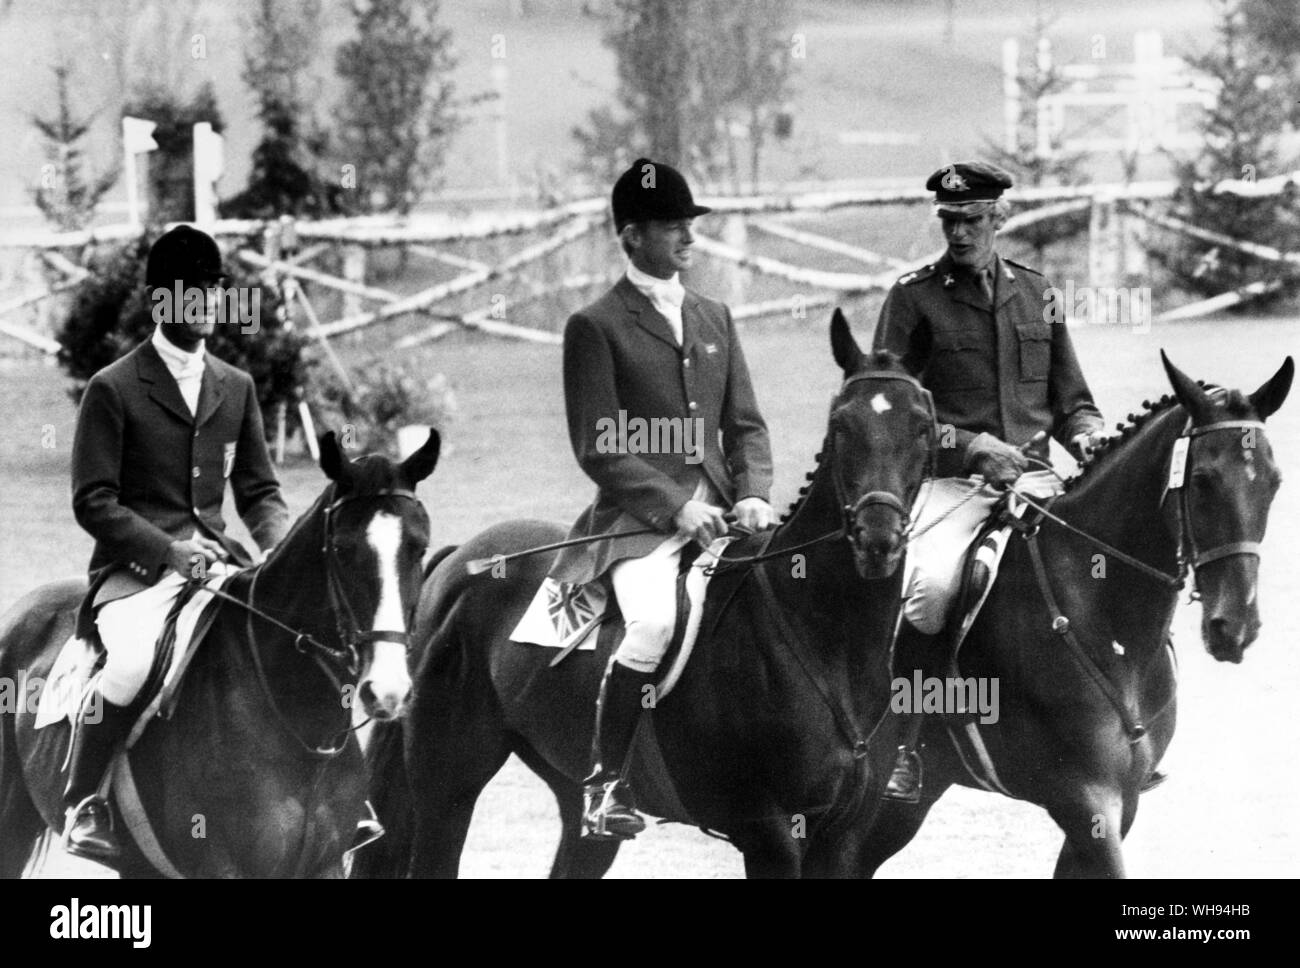 September 1972: Munich Olympics: Winners of the three-day Equestrian event. l-r: Italy's A. Argenton on 'Woodland' (2nd), Britain's Richard Meade on 'Laurieston' (1st), and Sweden's J. Jonsson on 'Sarajevo' (3rd).. UPI photo. LN 610796 Stock Photo